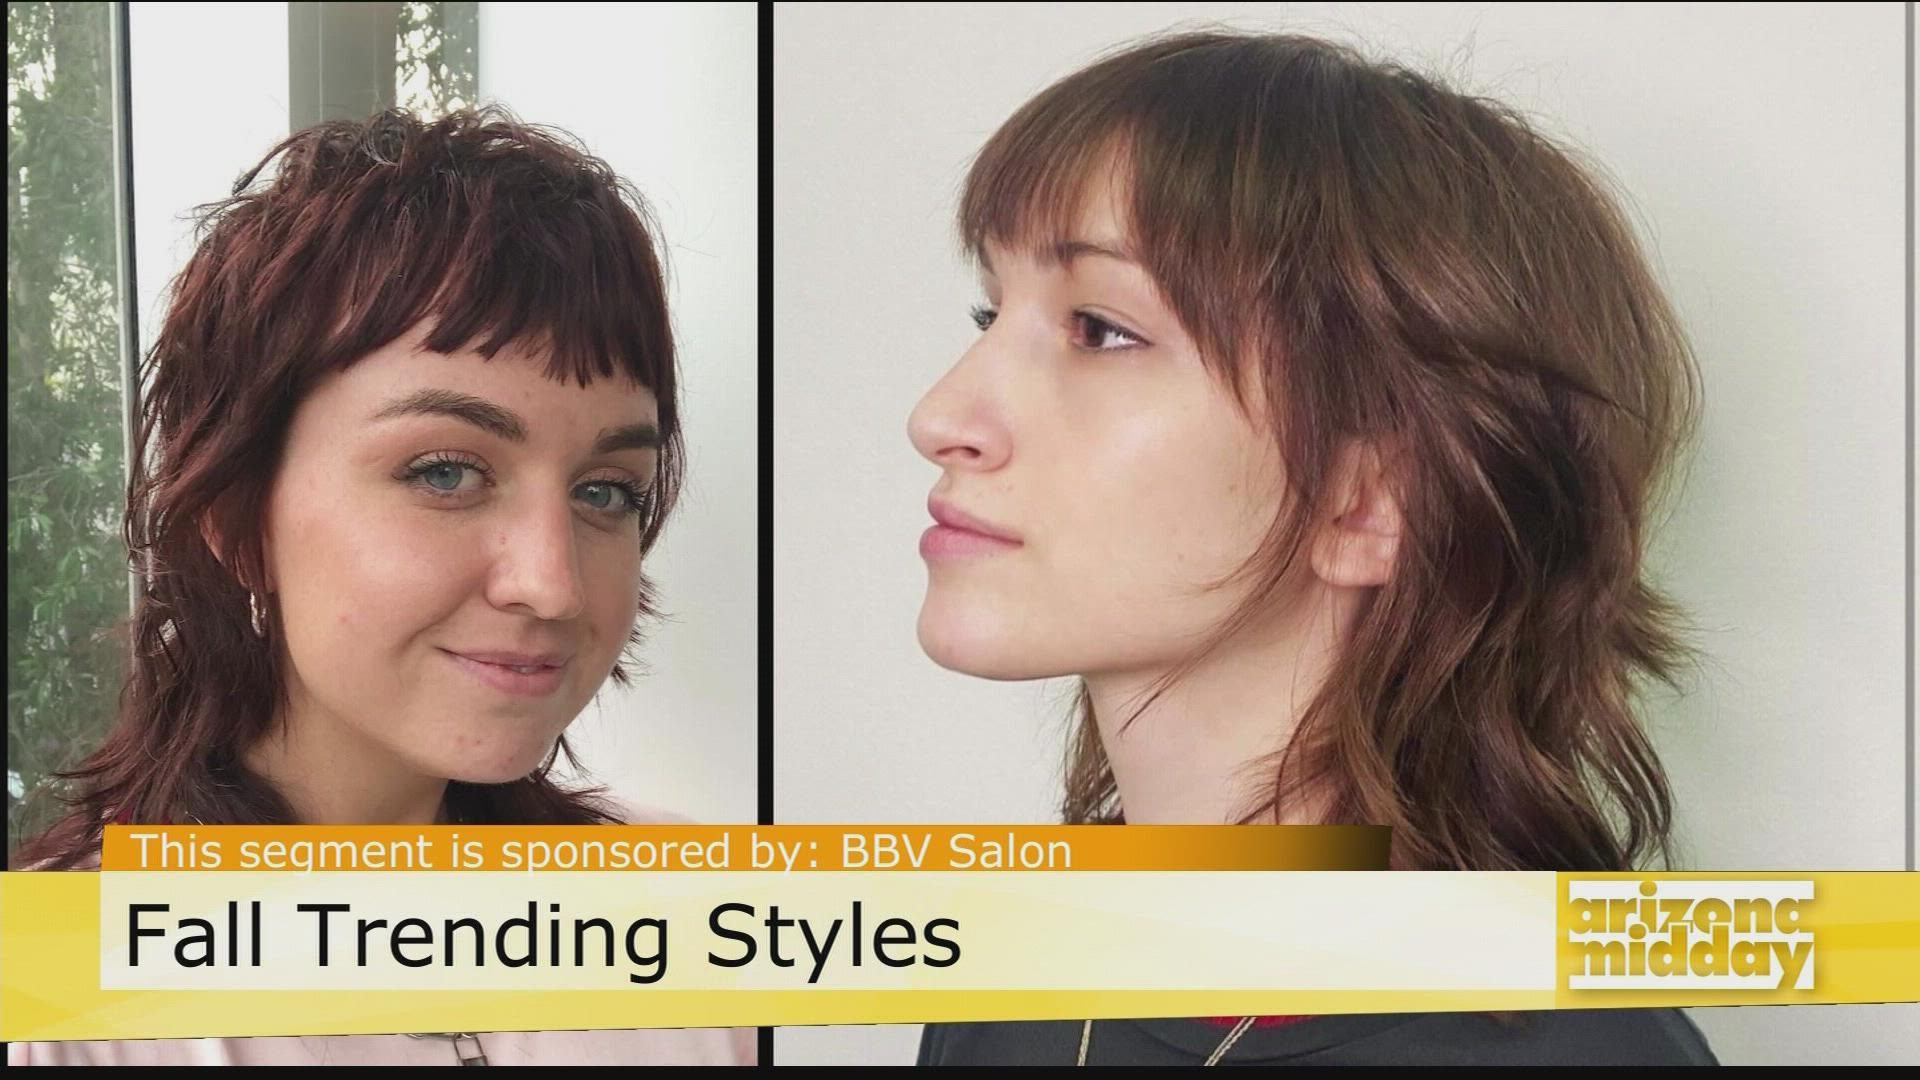 BBV Salon's Veronica shows us the latest in fall hair trends from the Shob to the Wolf Cut.